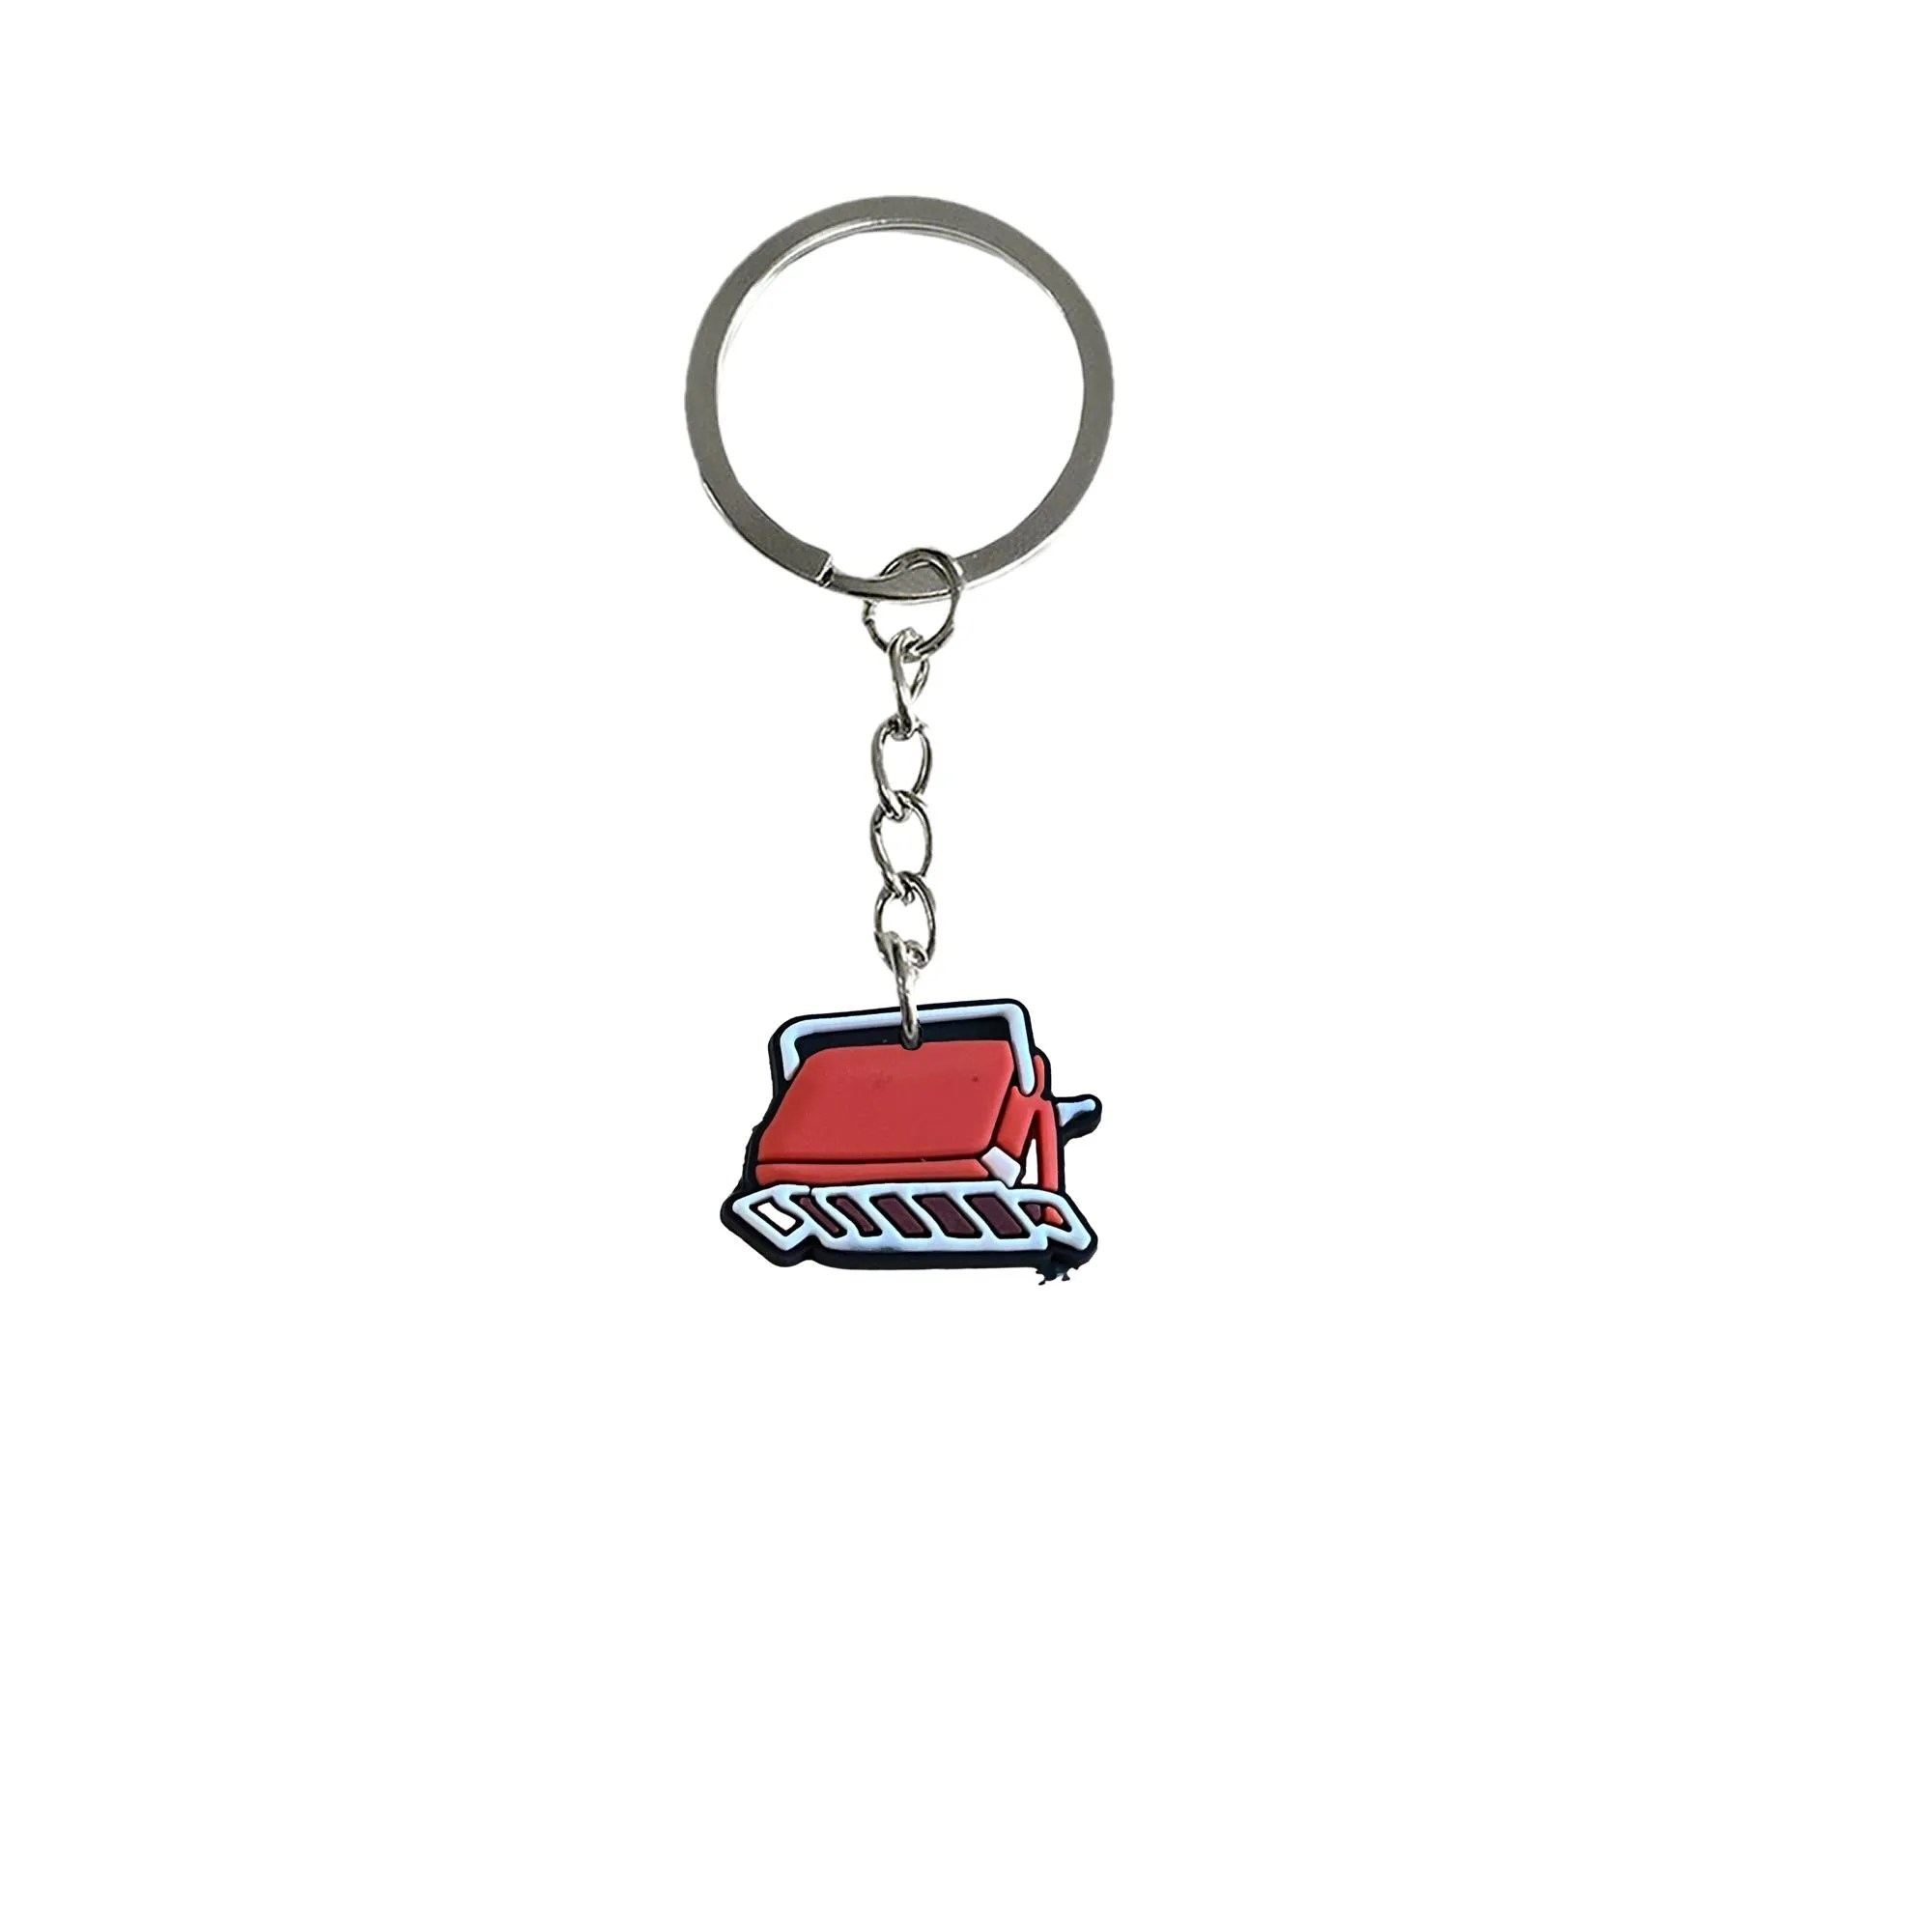 daily necessities keychain key ring for boys keychains girls birthday christmas party favors gift keyring suitable schoolbag pendant accessories bags backpack car charms